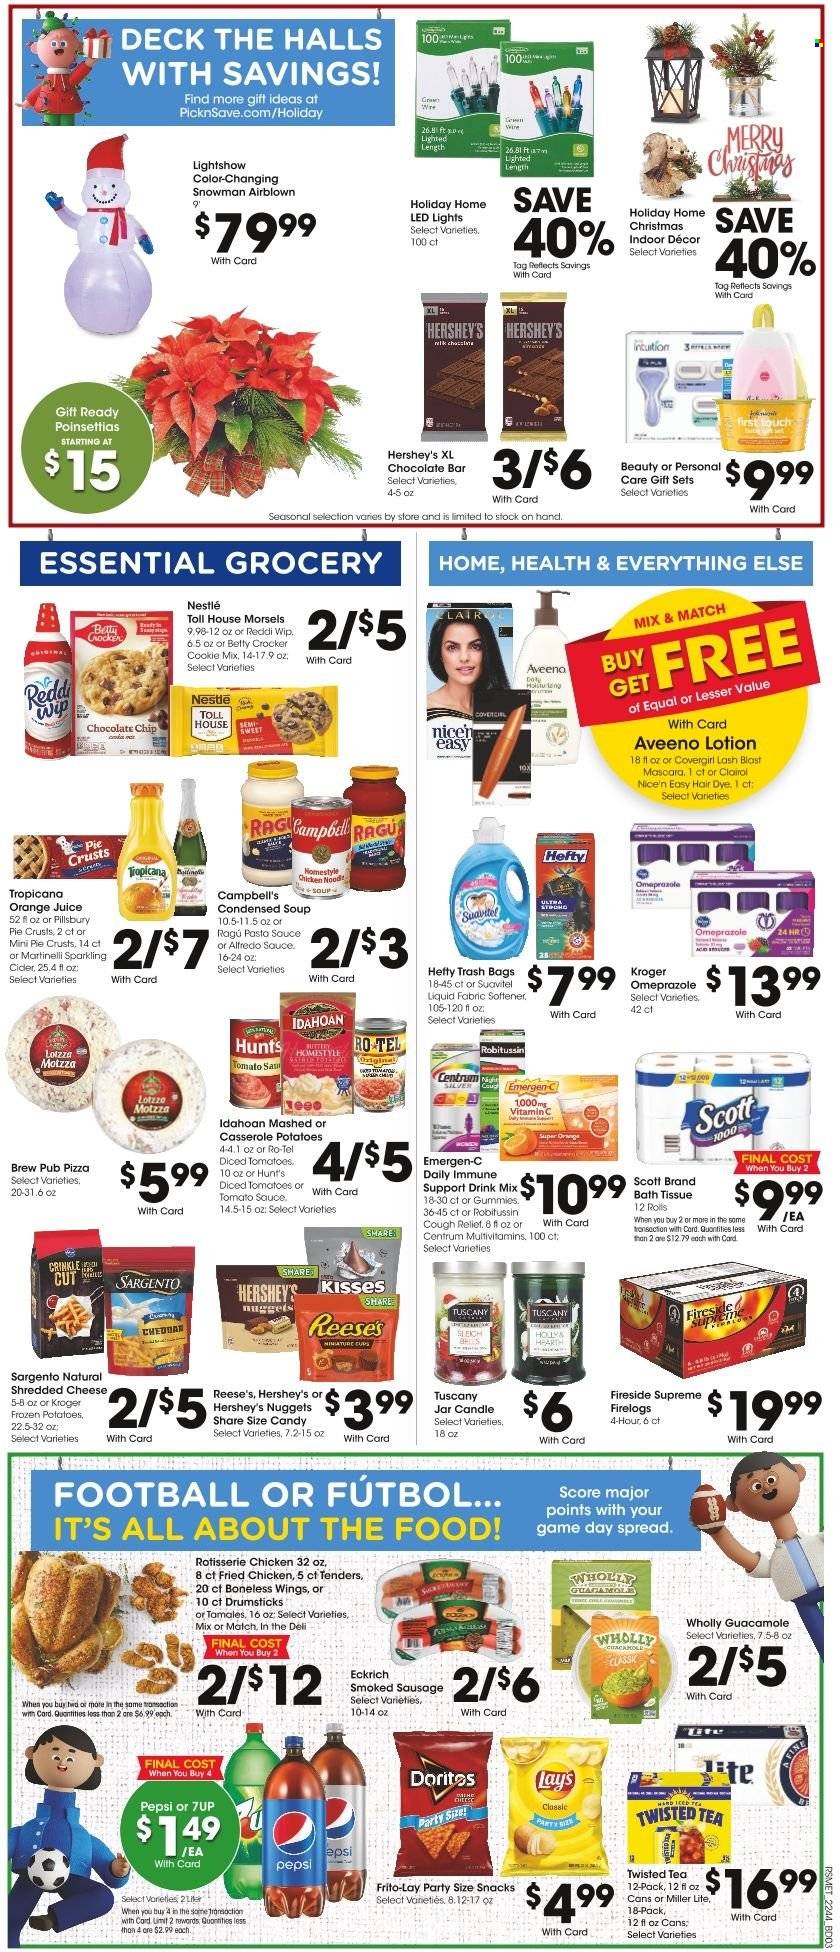 thumbnail - Pick ‘n Save Flyer - 11/30/2022 - 12/06/2022 - Sales products - pie, Campbell's, pizza, chicken roast, pasta sauce, condensed soup, soup, nuggets, fried chicken, Pillsbury, instant soup, Alfredo sauce, ragú pasta, sausage, smoked sausage, guacamole, shredded cheese, cheddar, Sargento, Reese's, Hershey's, Nestlé, Halls, chocolate chips, snack, chocolate bar, Doritos, Lay’s, Frito-Lay, pie crust, tomato sauce, diced tomatoes, ragu, Pepsi, orange juice, juice, 7UP, tea, sparkling cider, sparkling wine, cider, beer, bath tissue, Scott, fabric softener, Aveeno, Clairol, body lotion, Hefty, casserole, cup, candle, LED light, poinsettia, multivitamin, Robitussin, vitamin c, Emergen-C, Centrum, mascara, Miller Lite, Twisted Tea. Page 6.